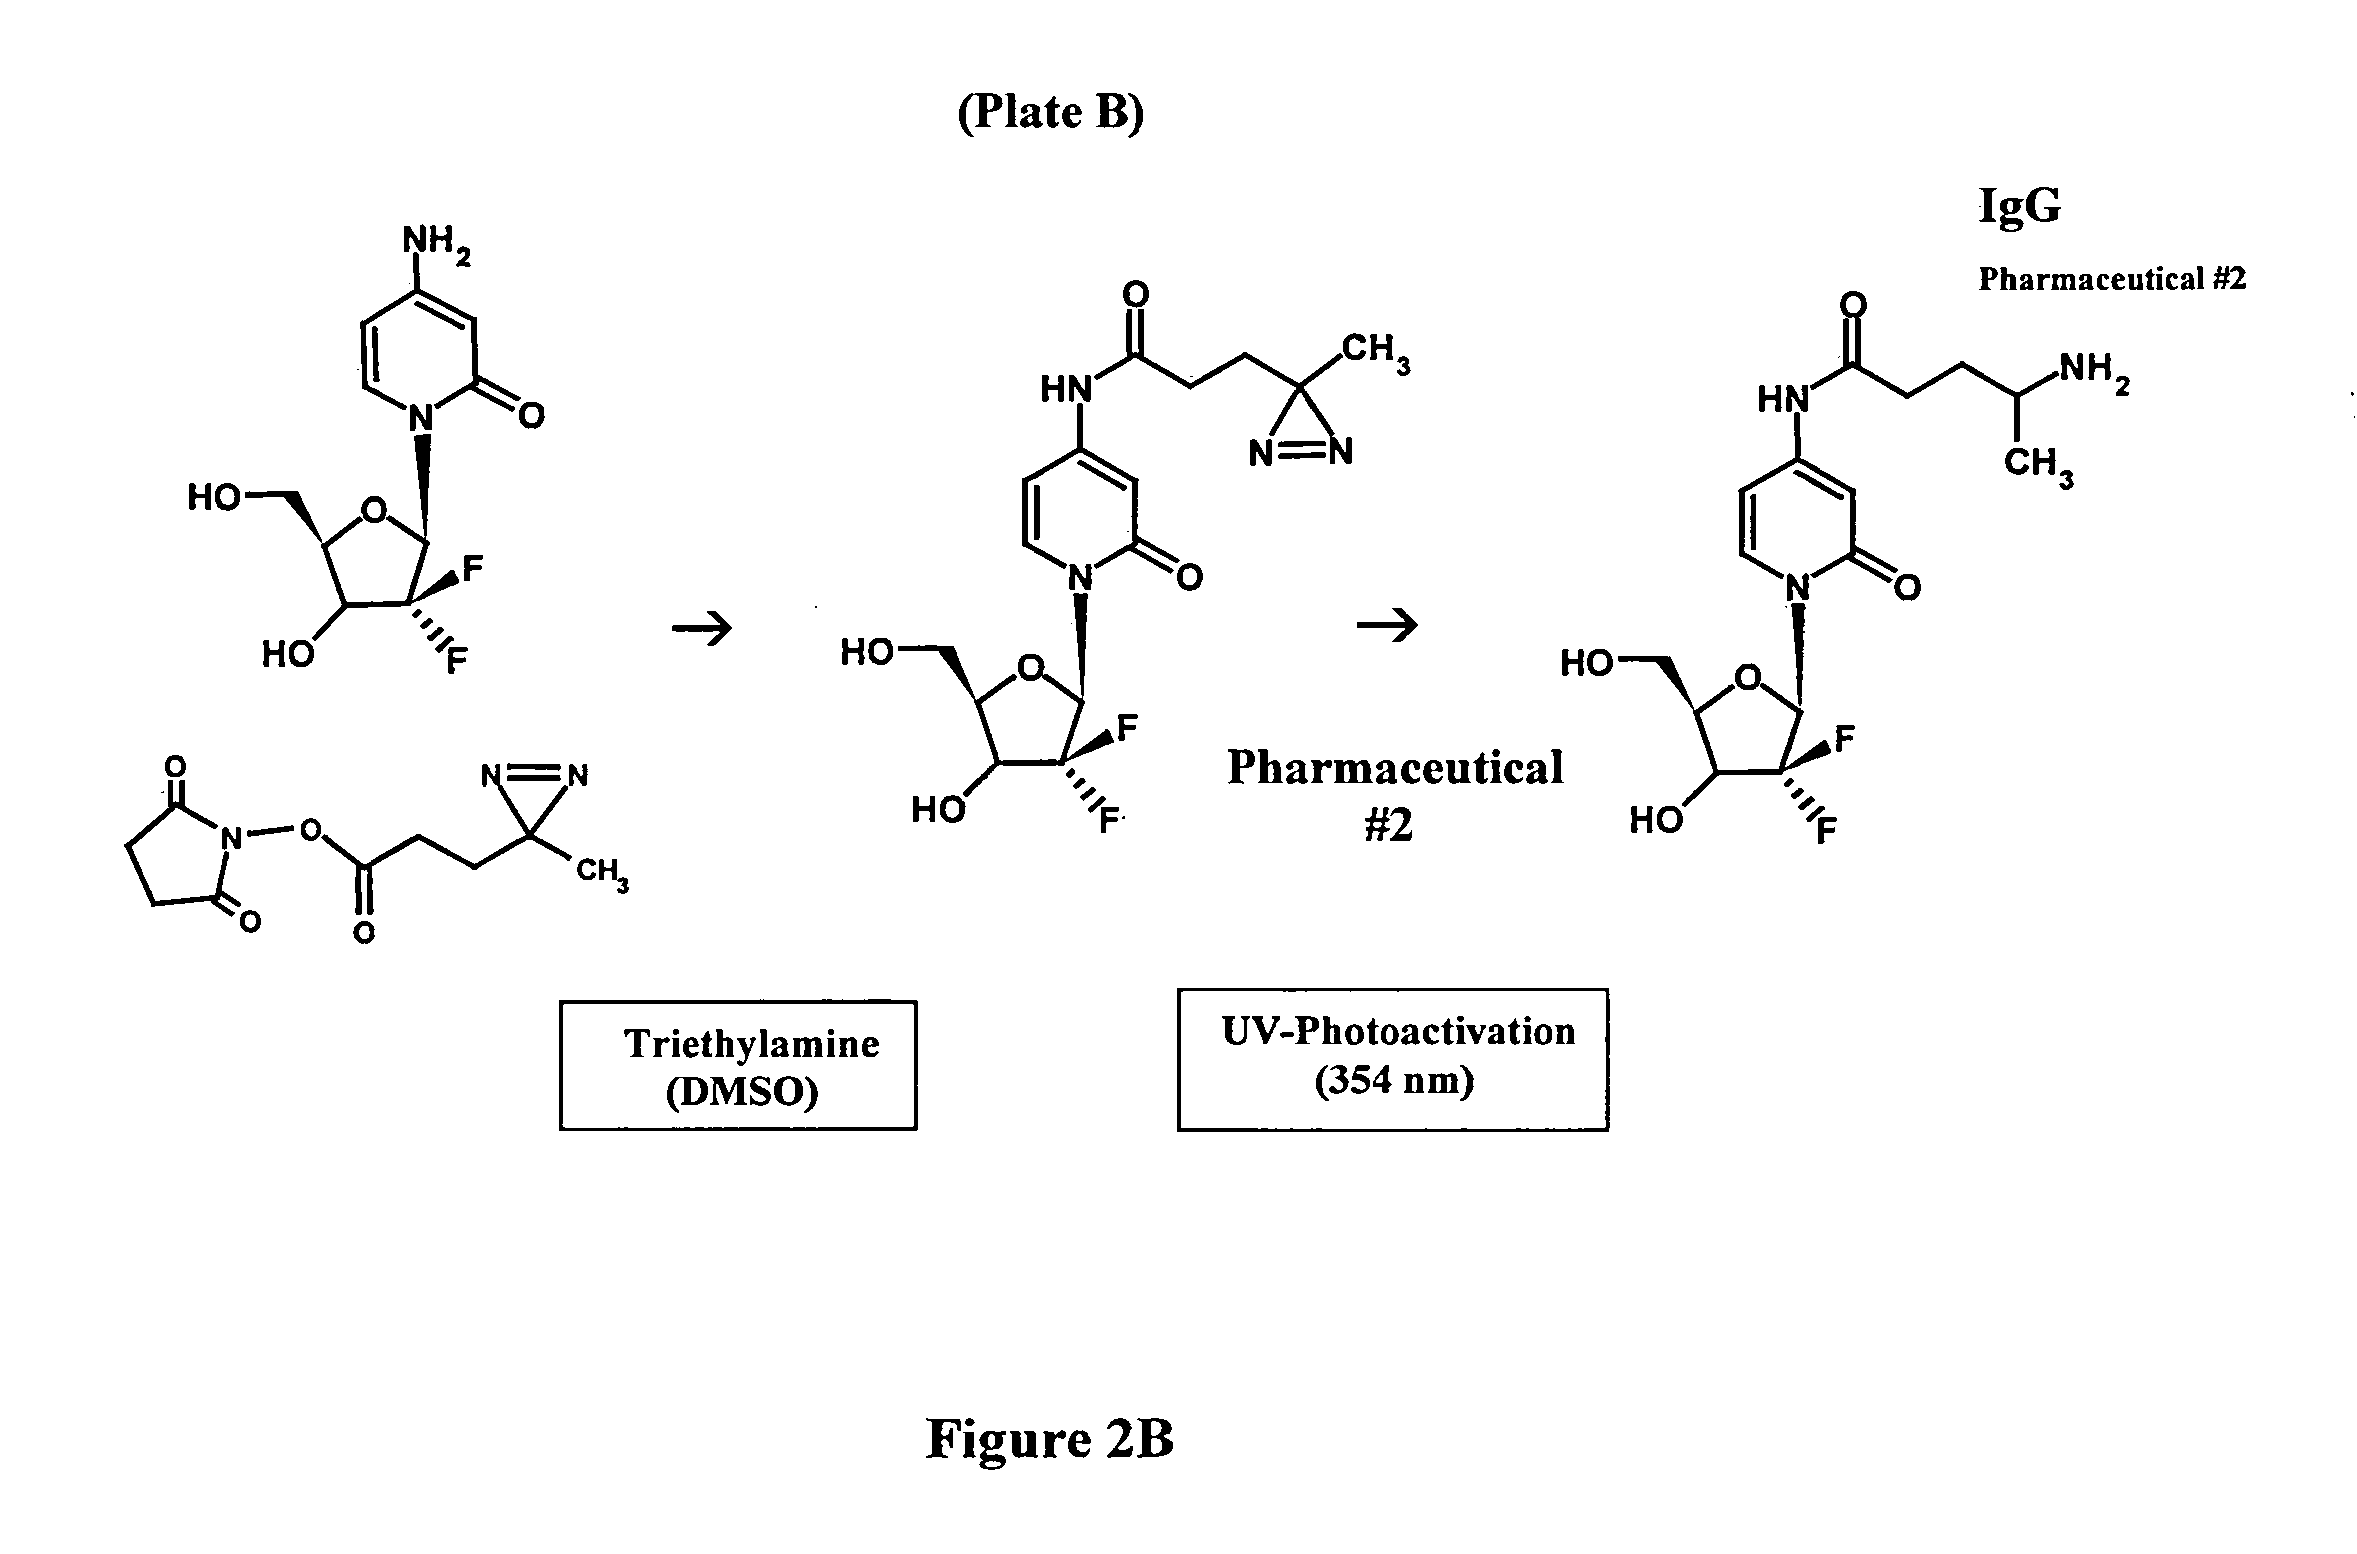 Molecular Design and Chemical Synthesis of Pharmaceutical-Ligands and Pharmaceutical-Pharmaceutical Analogs with Multiple Mechanisms of Action